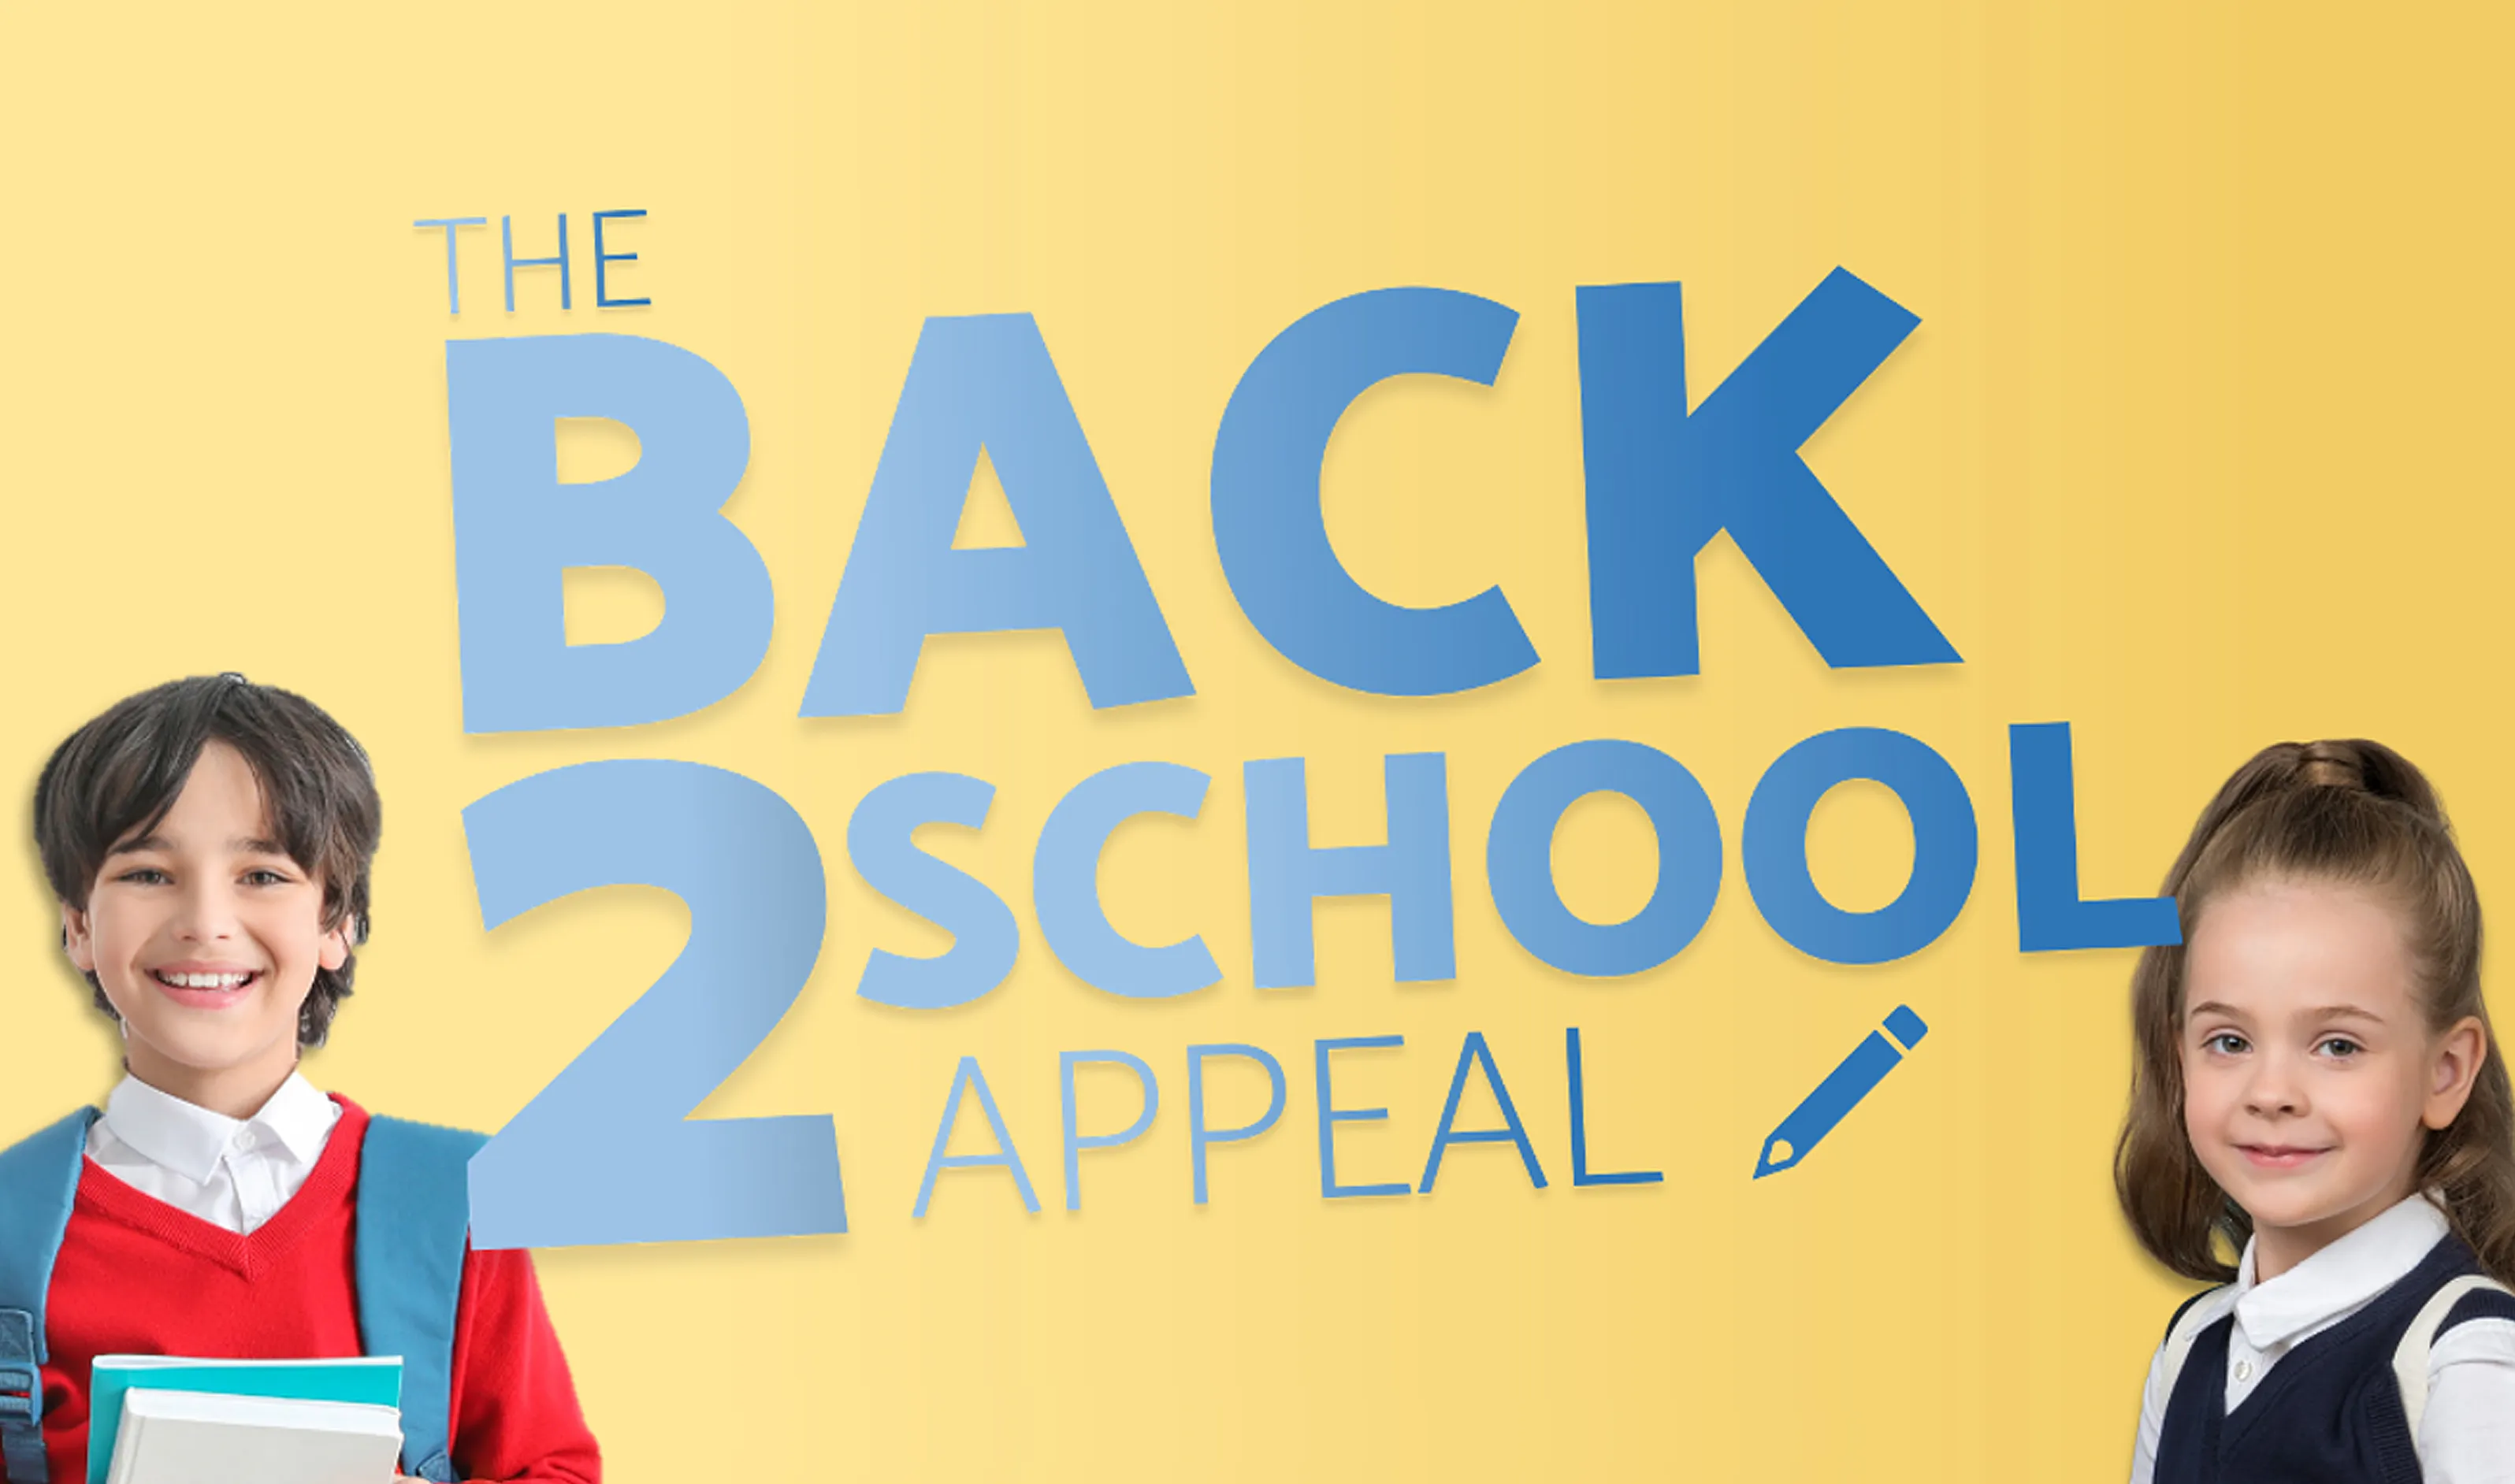 Edward Cooke Sponsors Back to School Appeal with V2 Radio